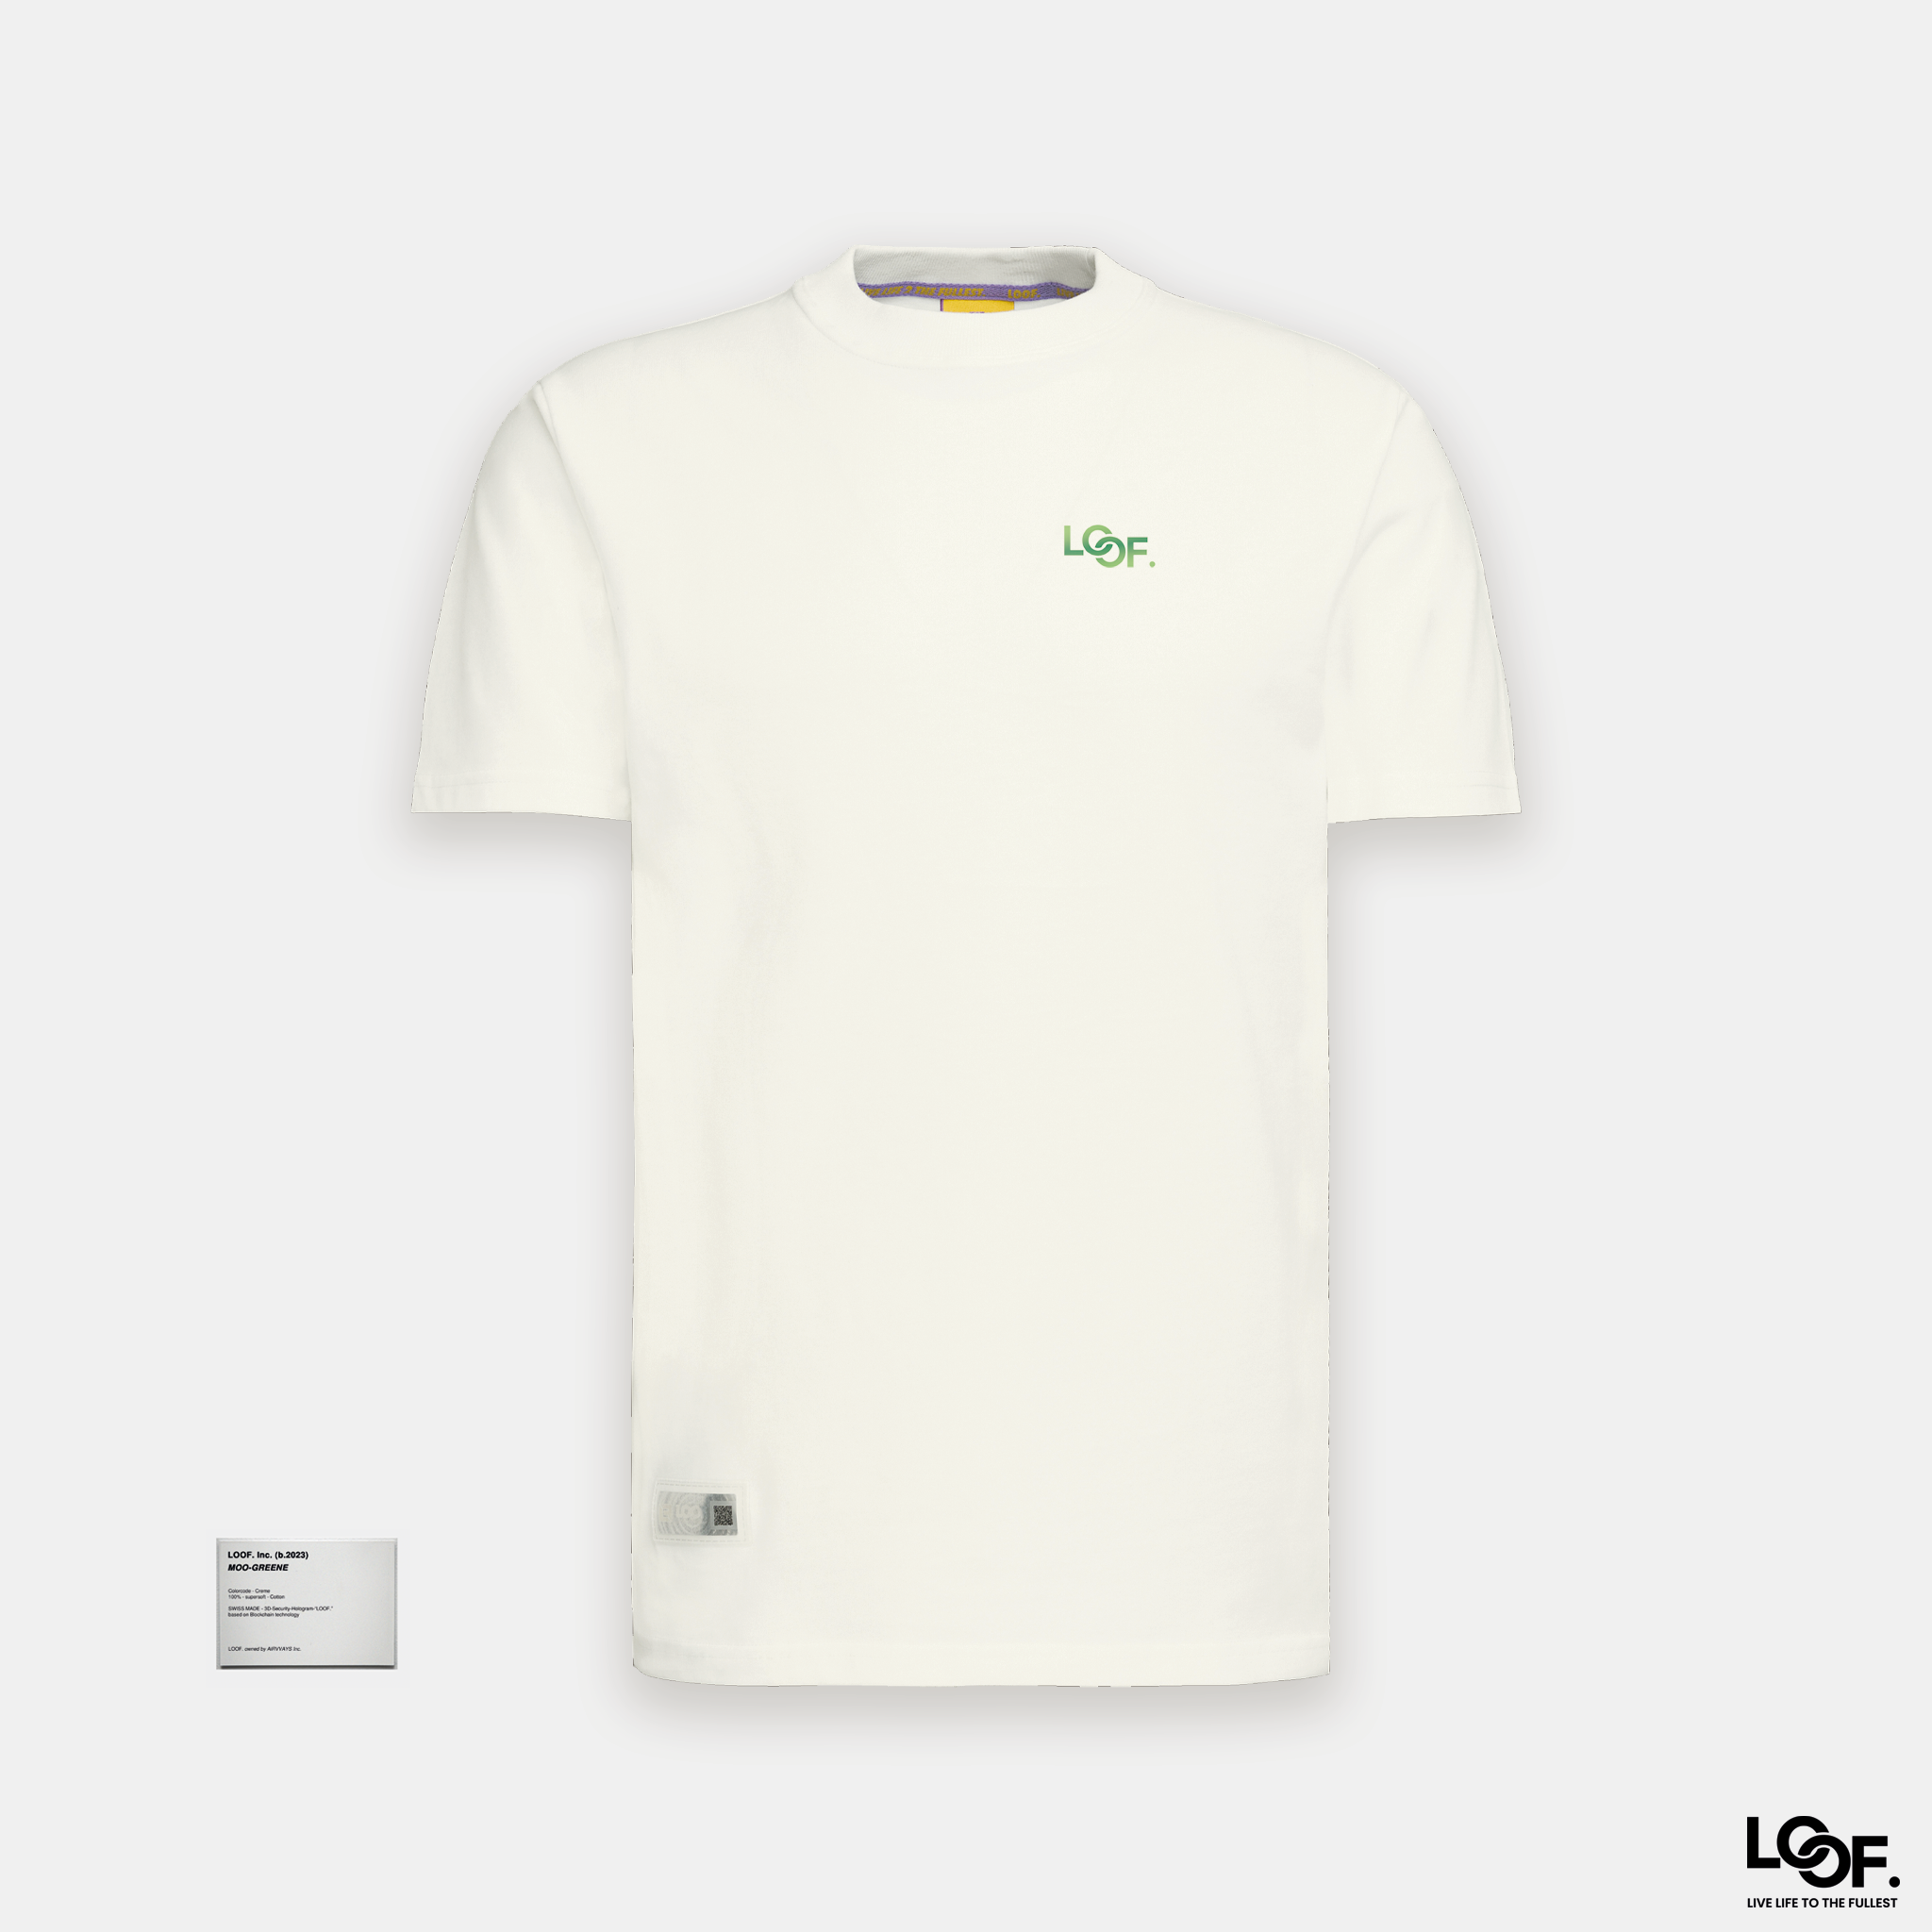 LOOF. Swiss streetwear longsize cut t-shirt in the color creme / off-white. The LOOF logo is in the iconic olympinikes design in the blending colors of greene